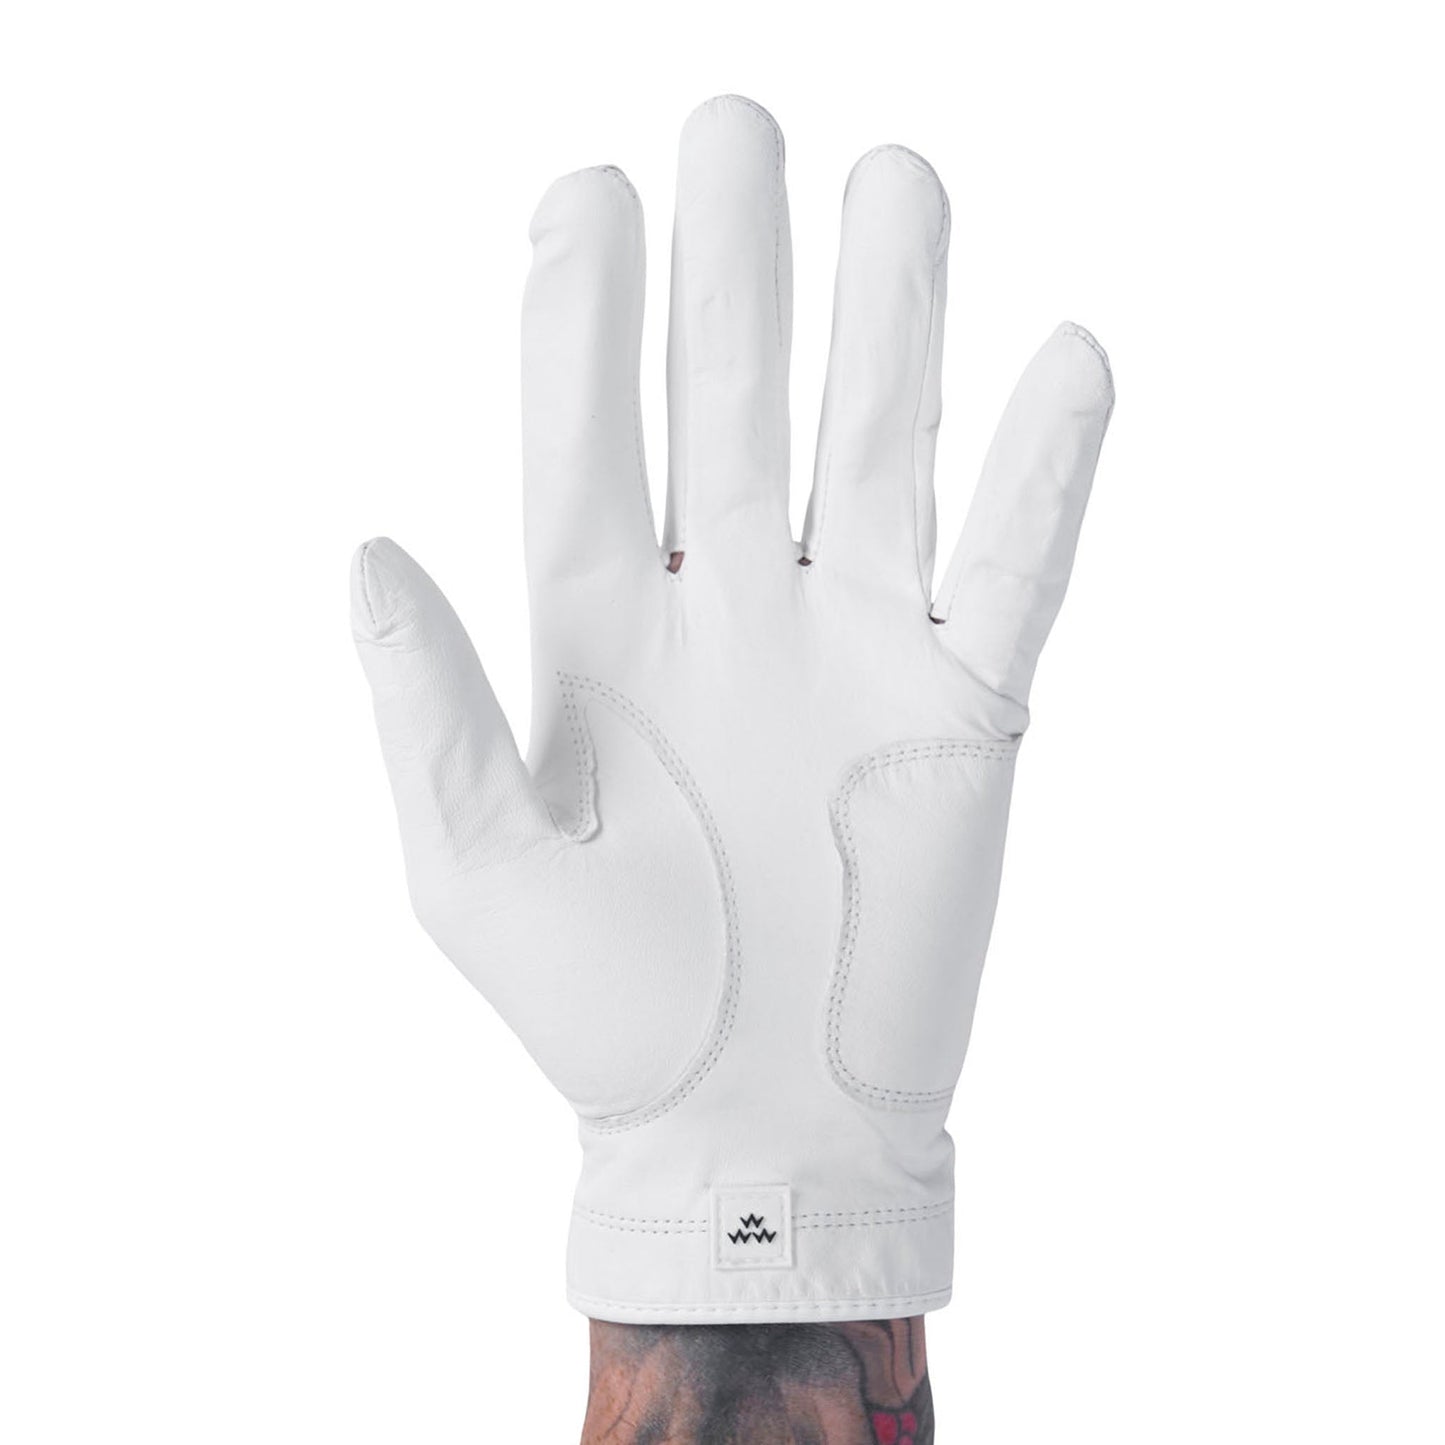 Fore Tiger Golf Glove